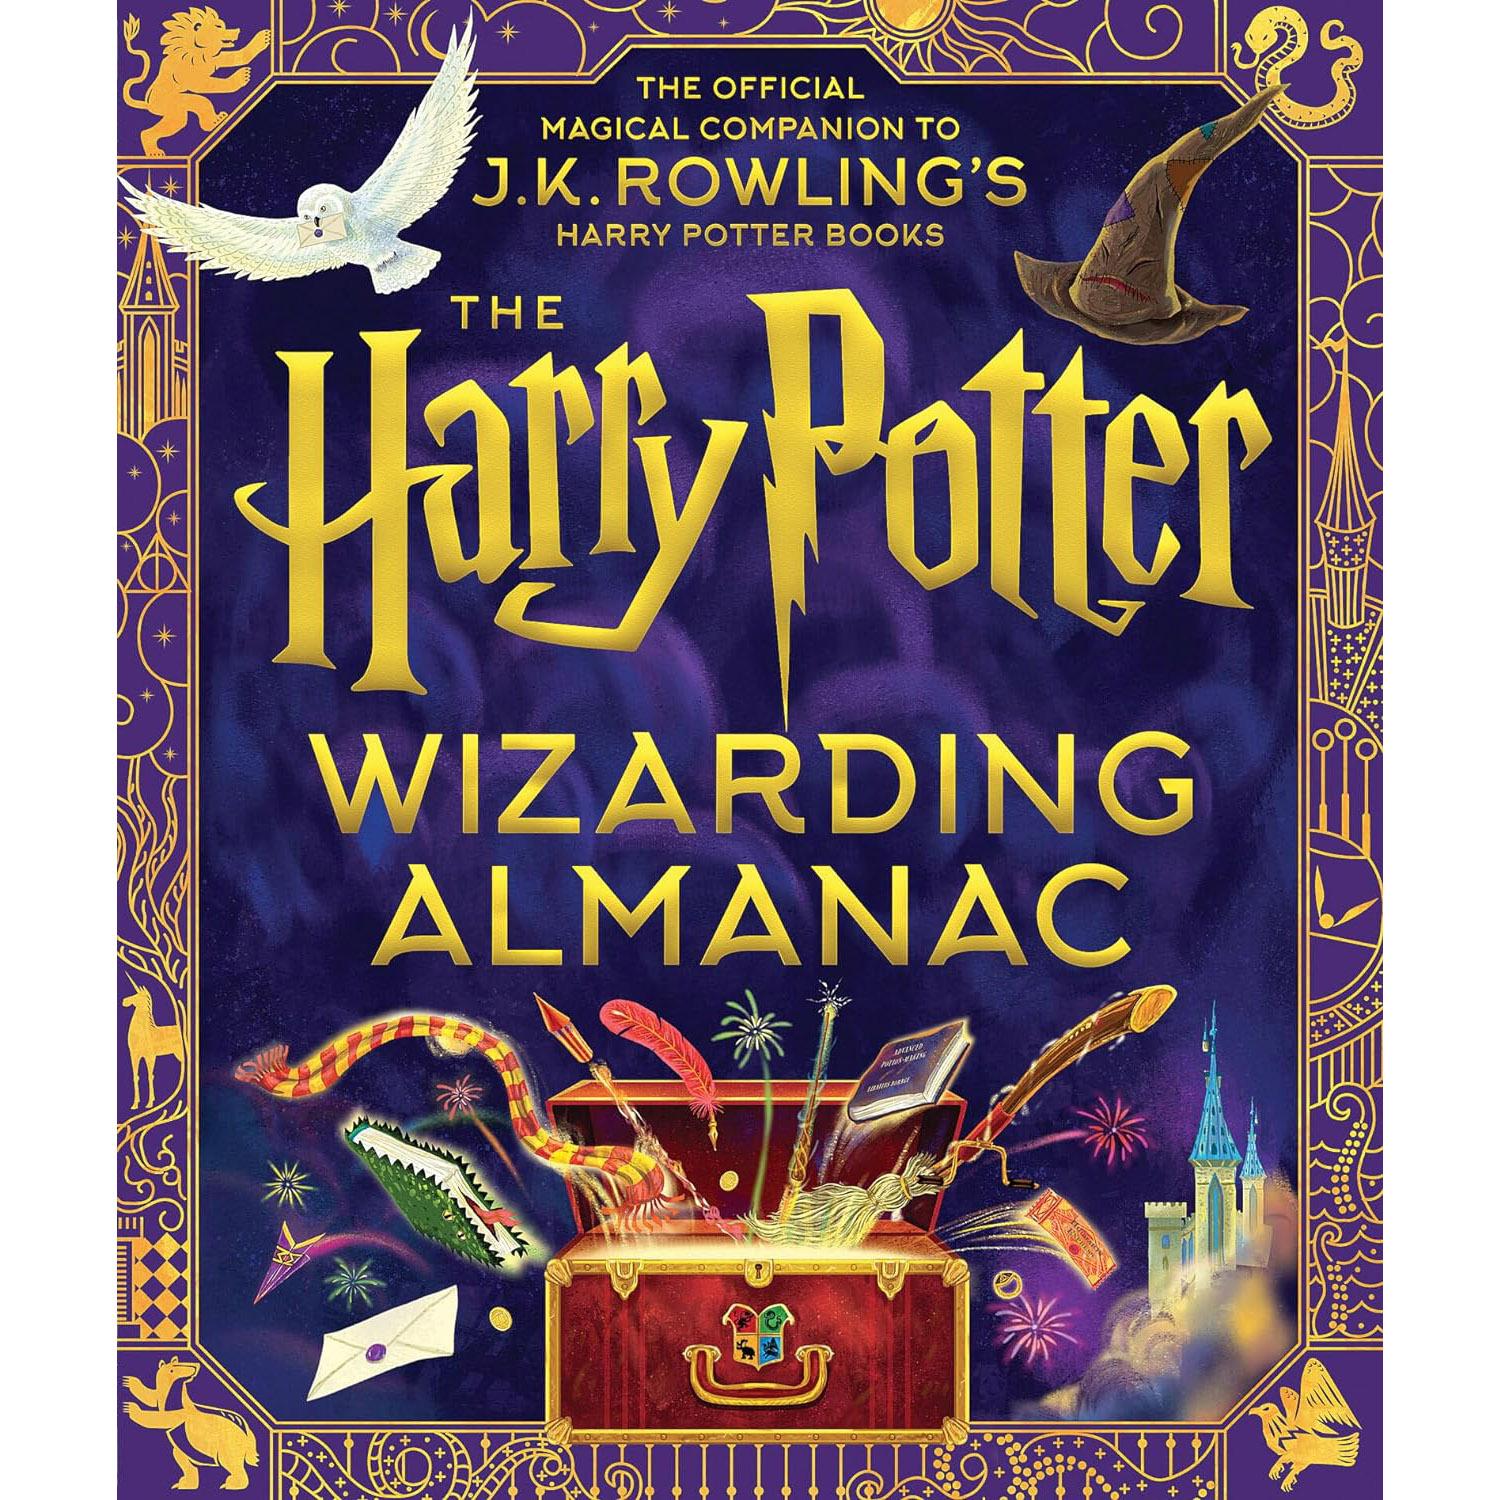 The Harry Potter Wizarding Almanac Hardcover Book for $20.01